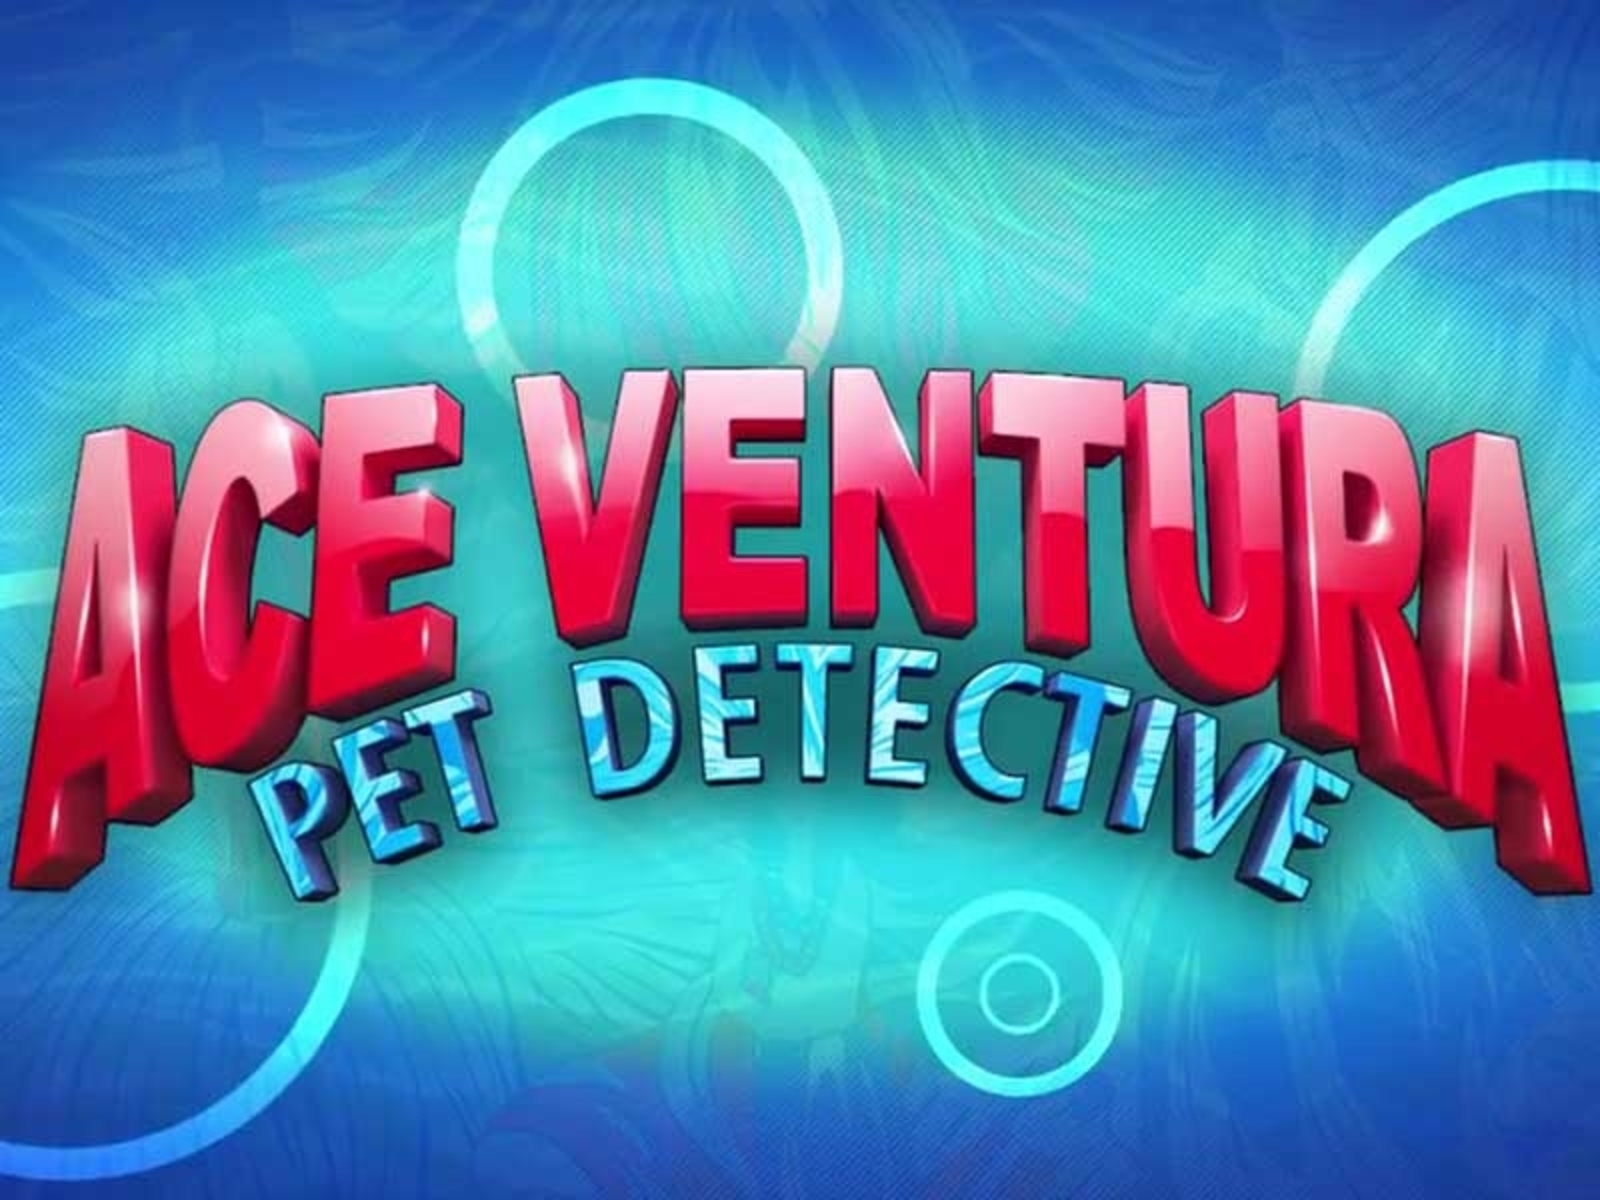 The Ace Ventura Online Slot Demo Game by Playtech